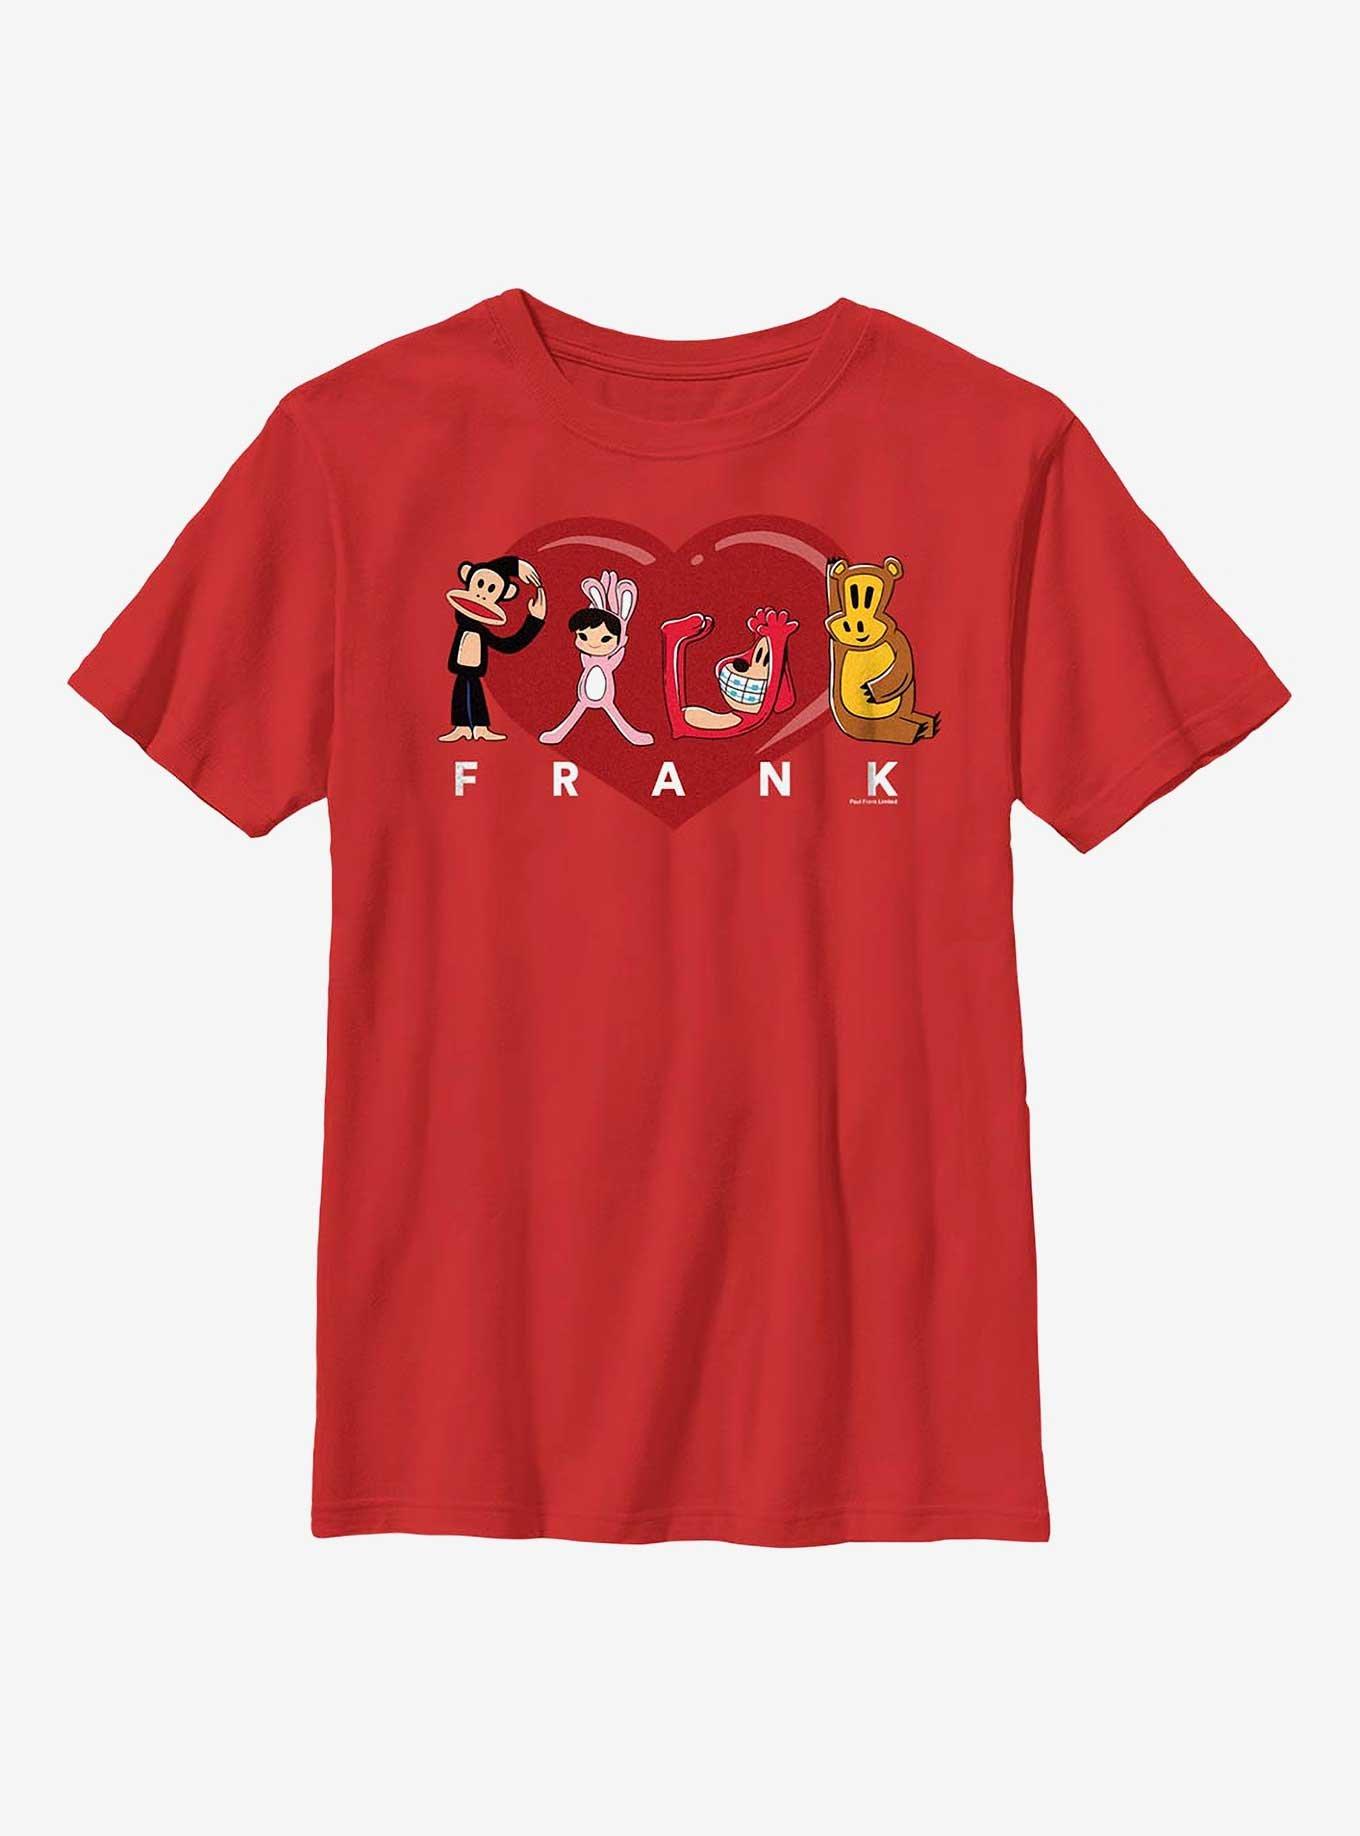 Paul Frank Love Frank Characters Youth T-Shirt, RED, hi-res